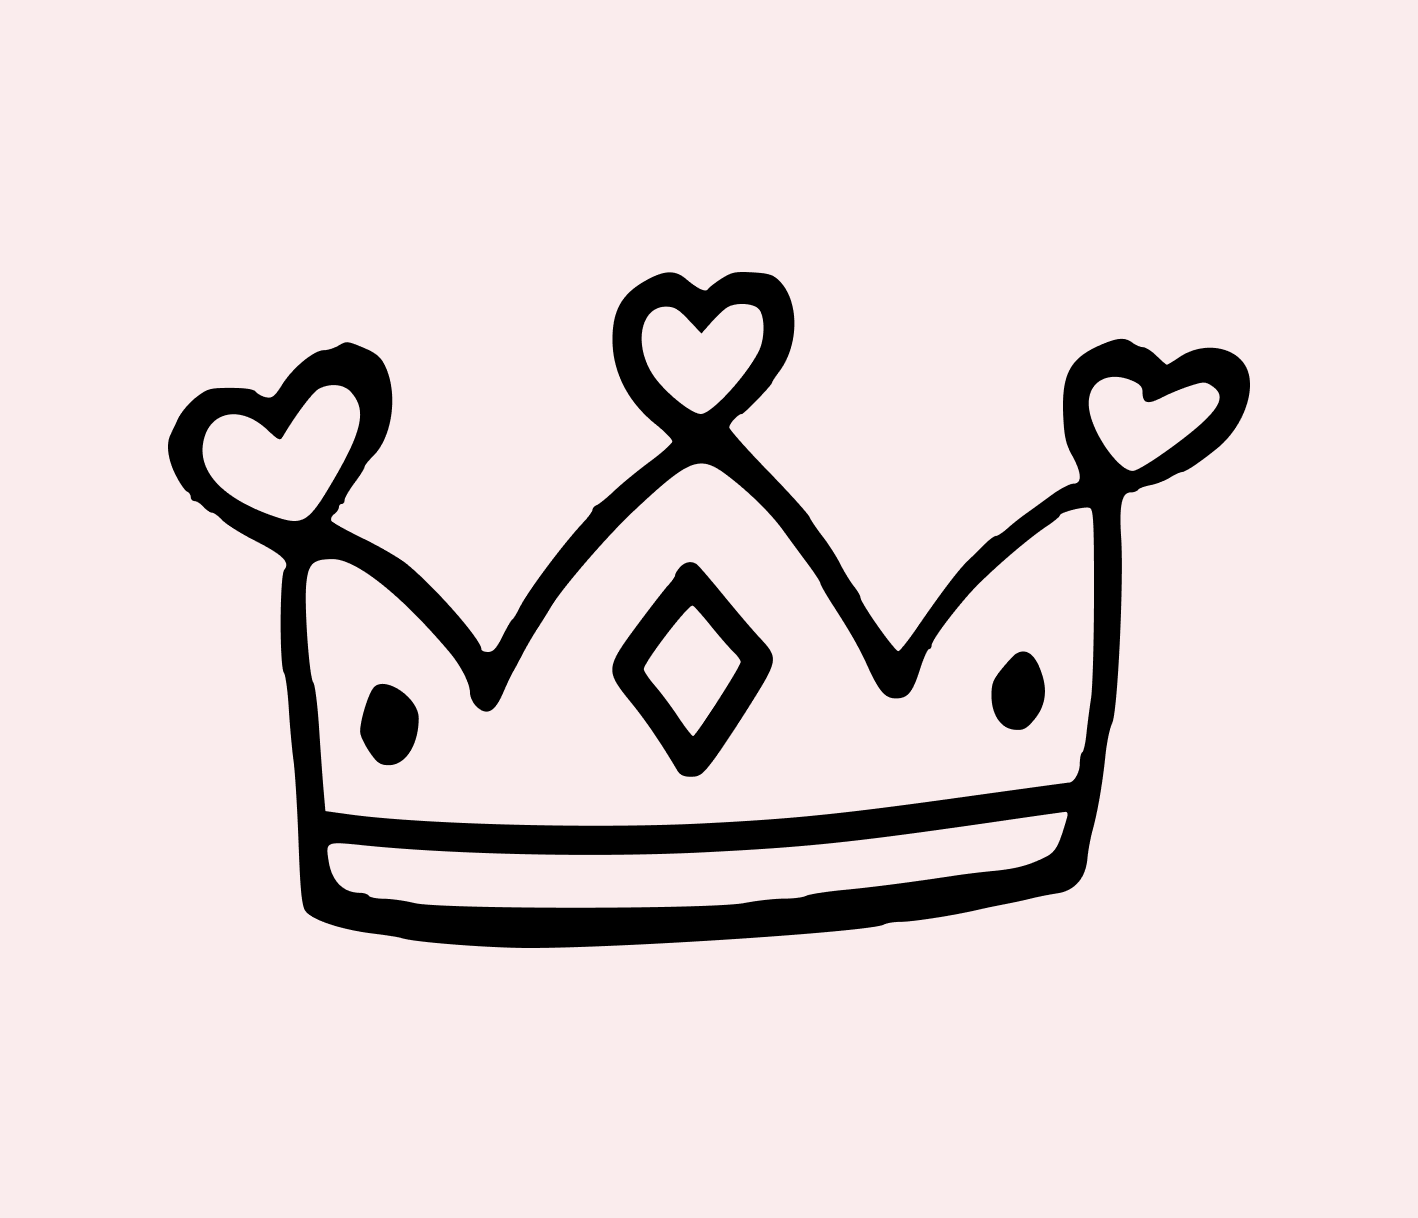 Amazon.com : Tattoos 2 Sheets King Queen Imperial Crown Temporary Tattoo  Body Fake Sticker Hand Arm Neck Wrist Art Sticker Party Fashion Fantasy  Tattoos for Men Women : Beauty & Personal Care